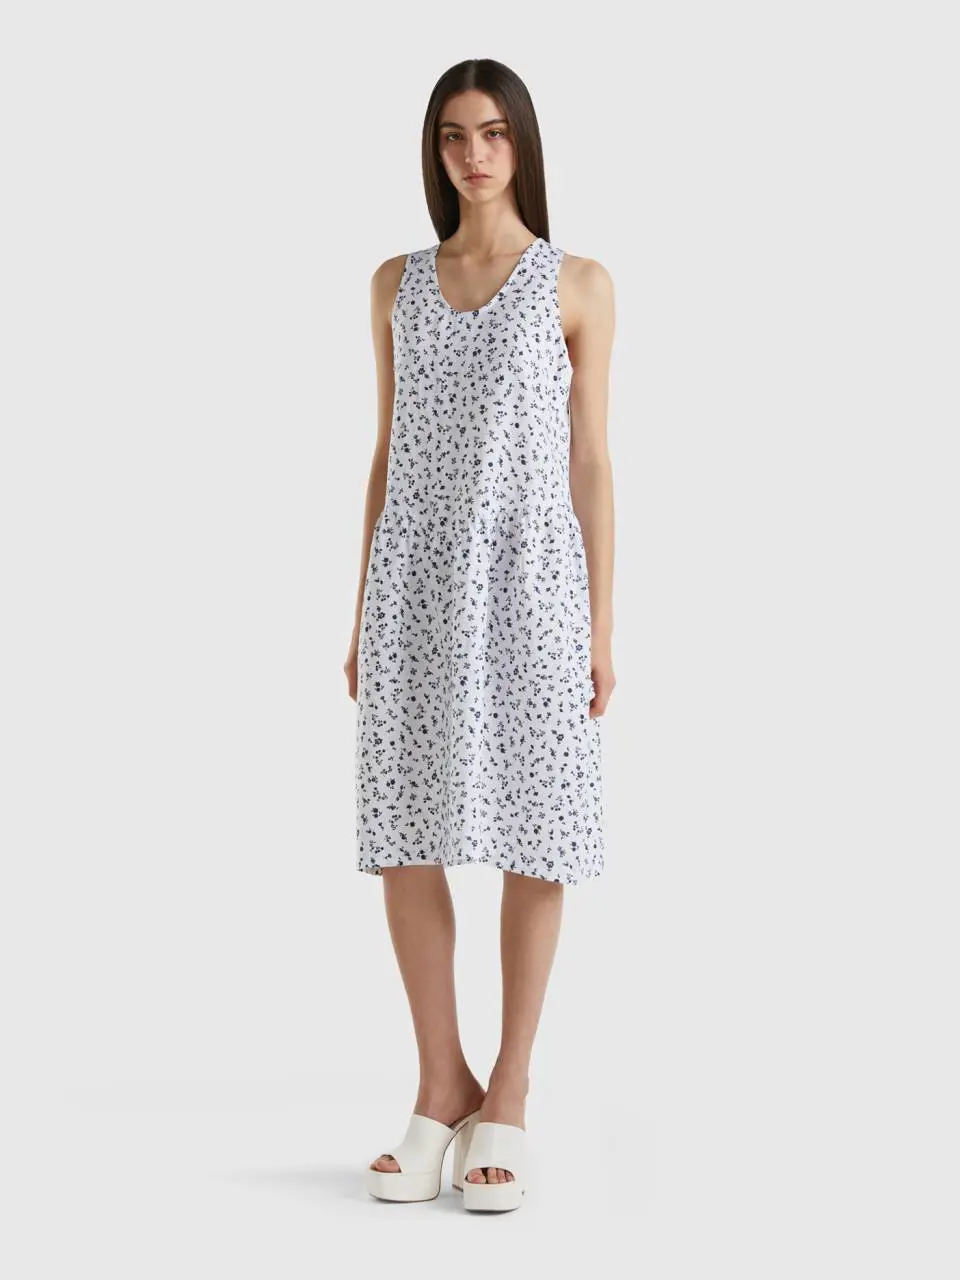 Benetton dress in pure printed linen. 1